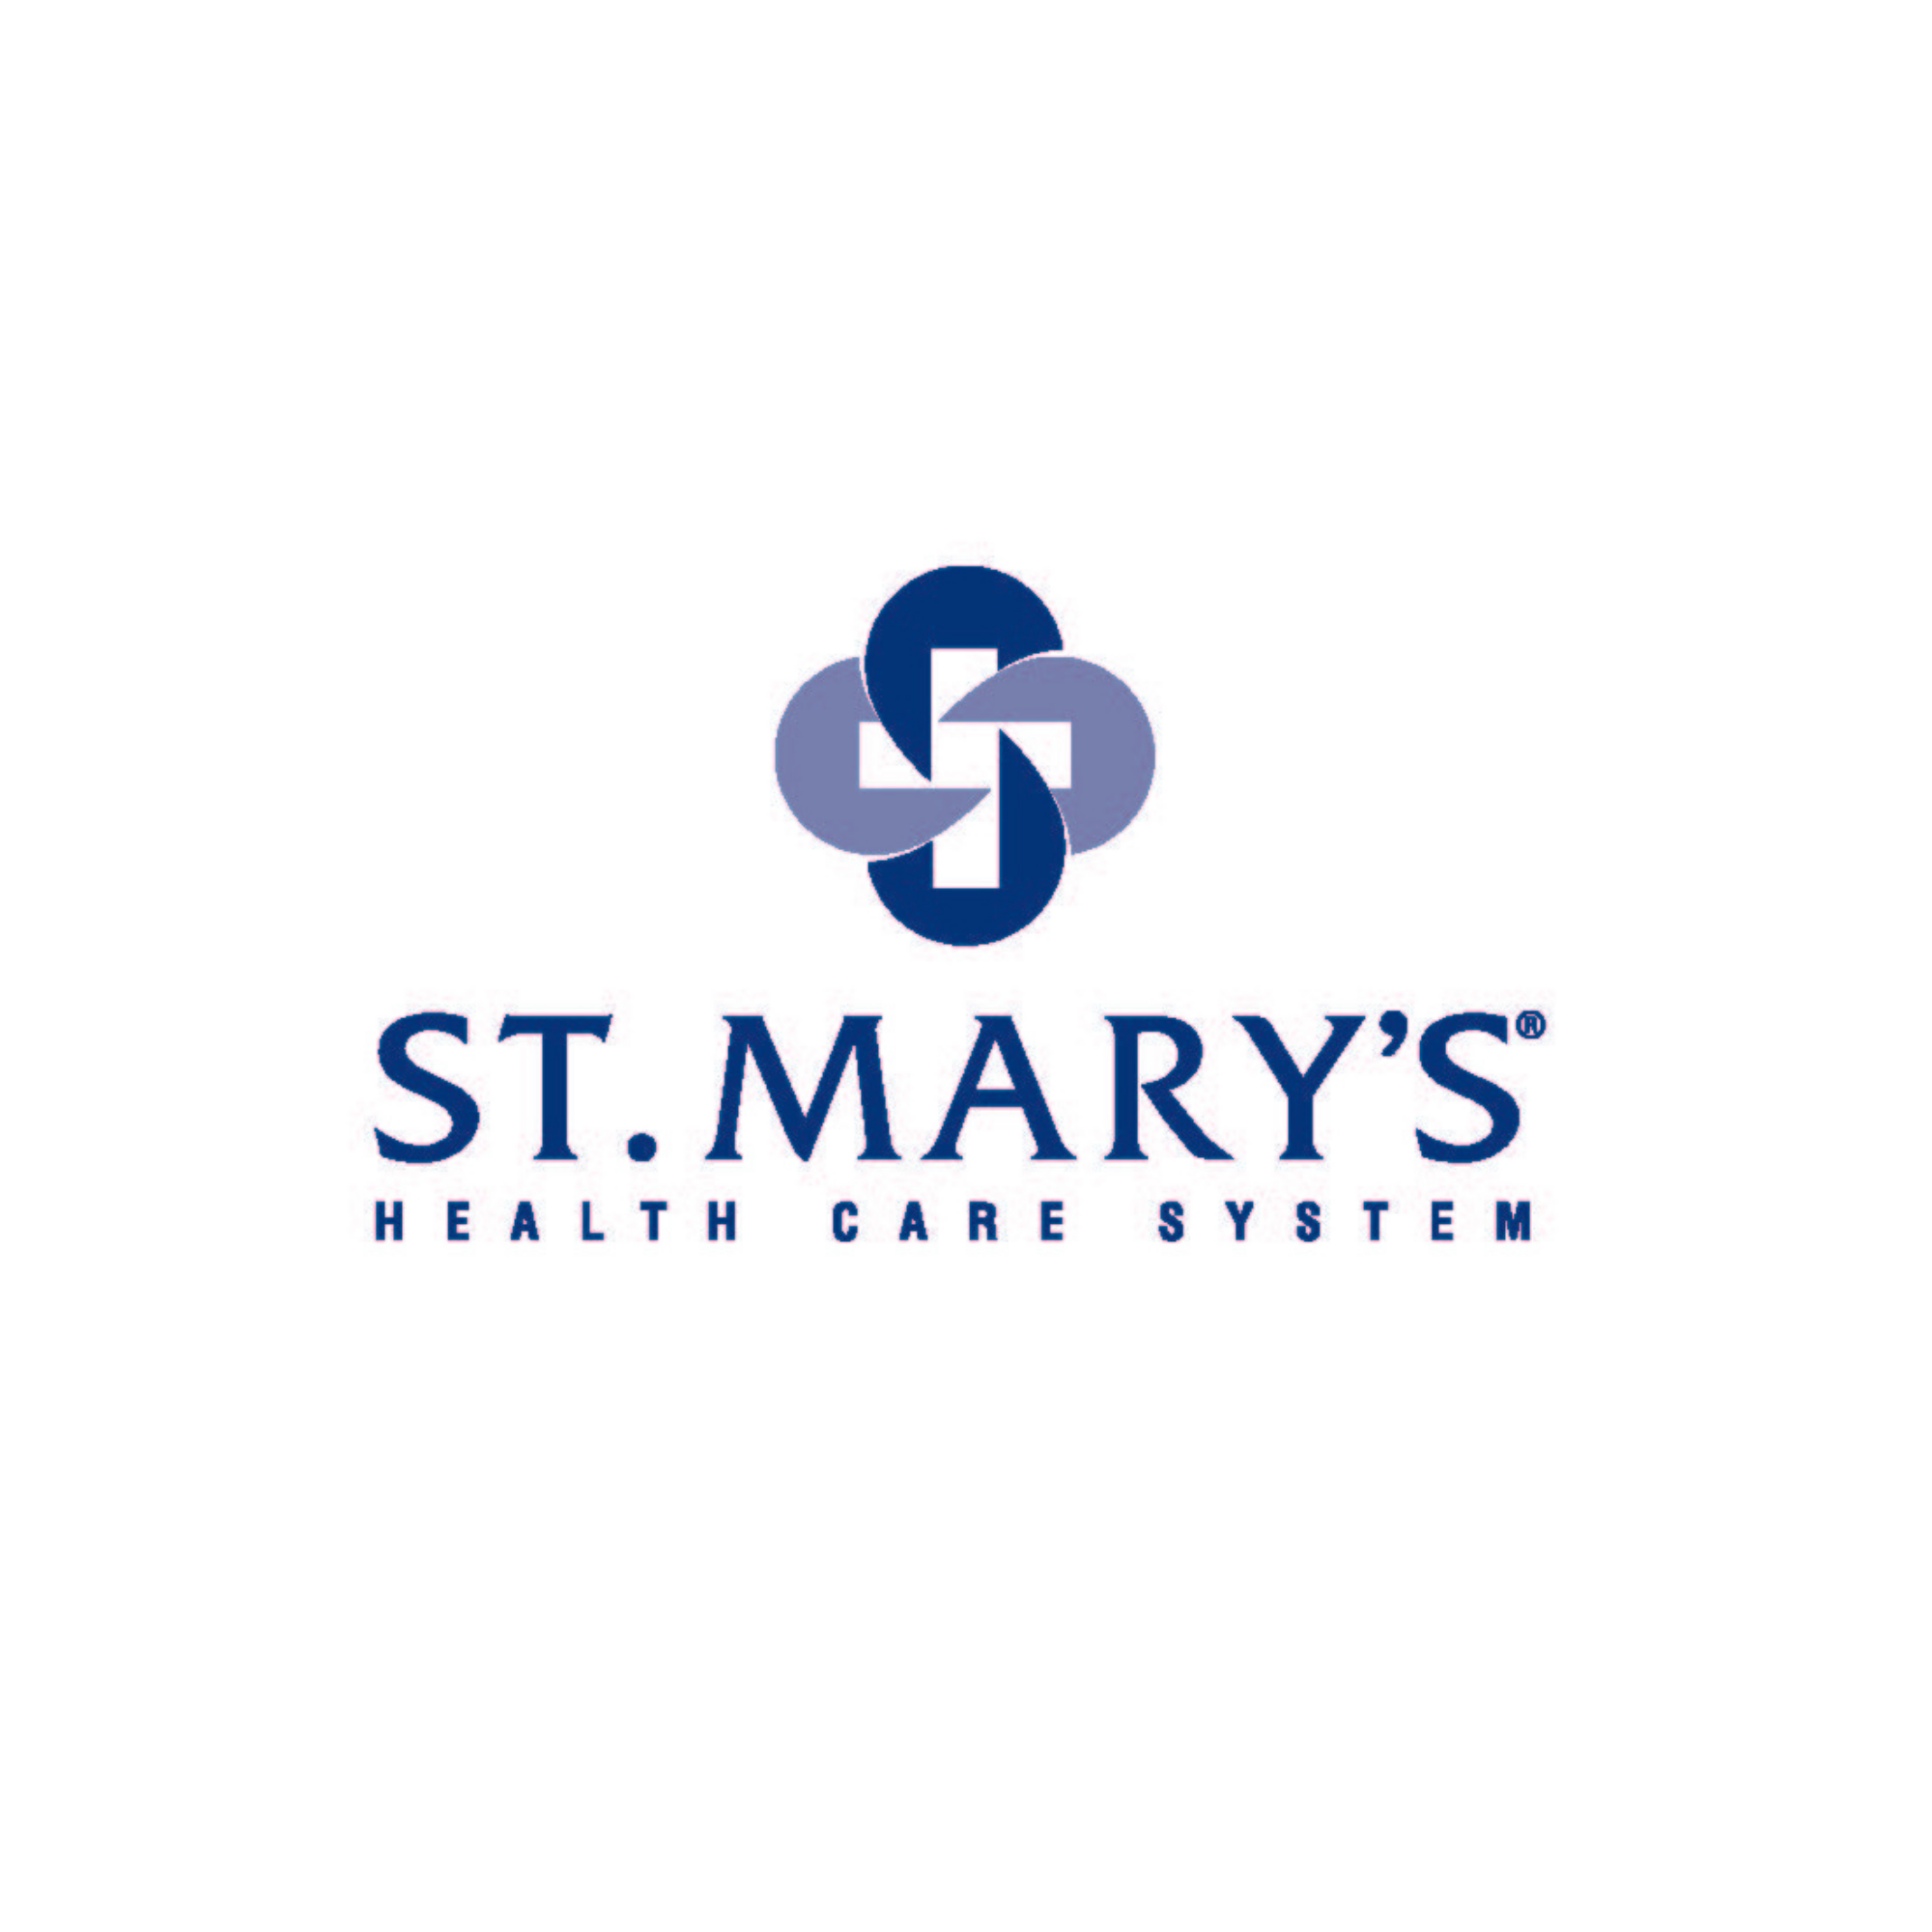 a logo for st Mary's health care system